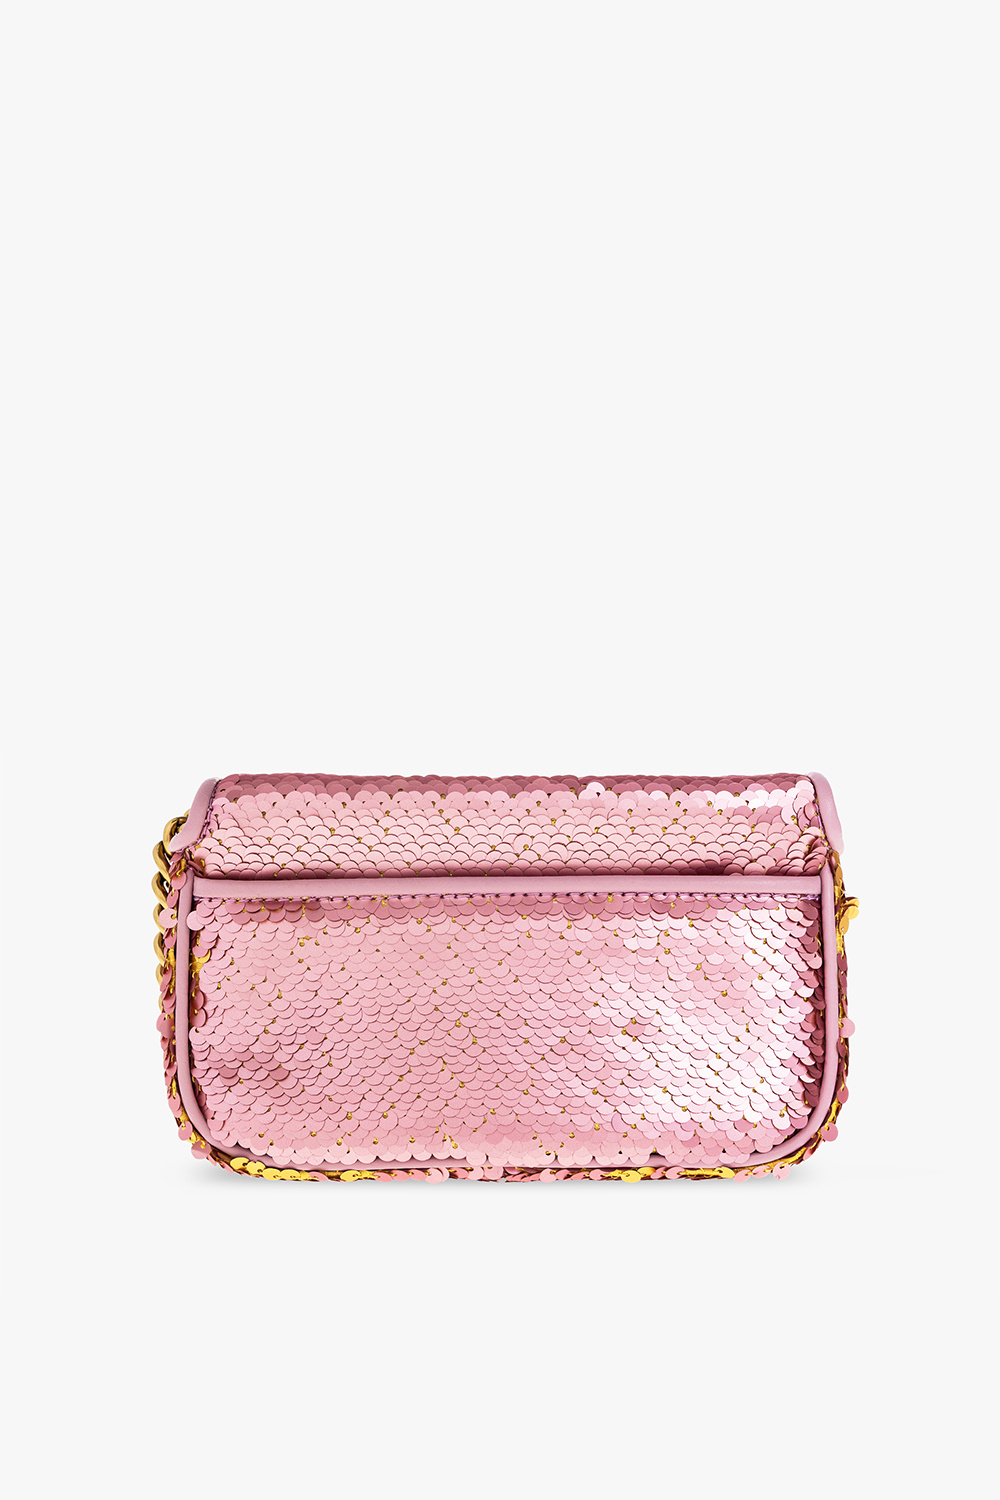 Marc Jacobs Clutch in Pink